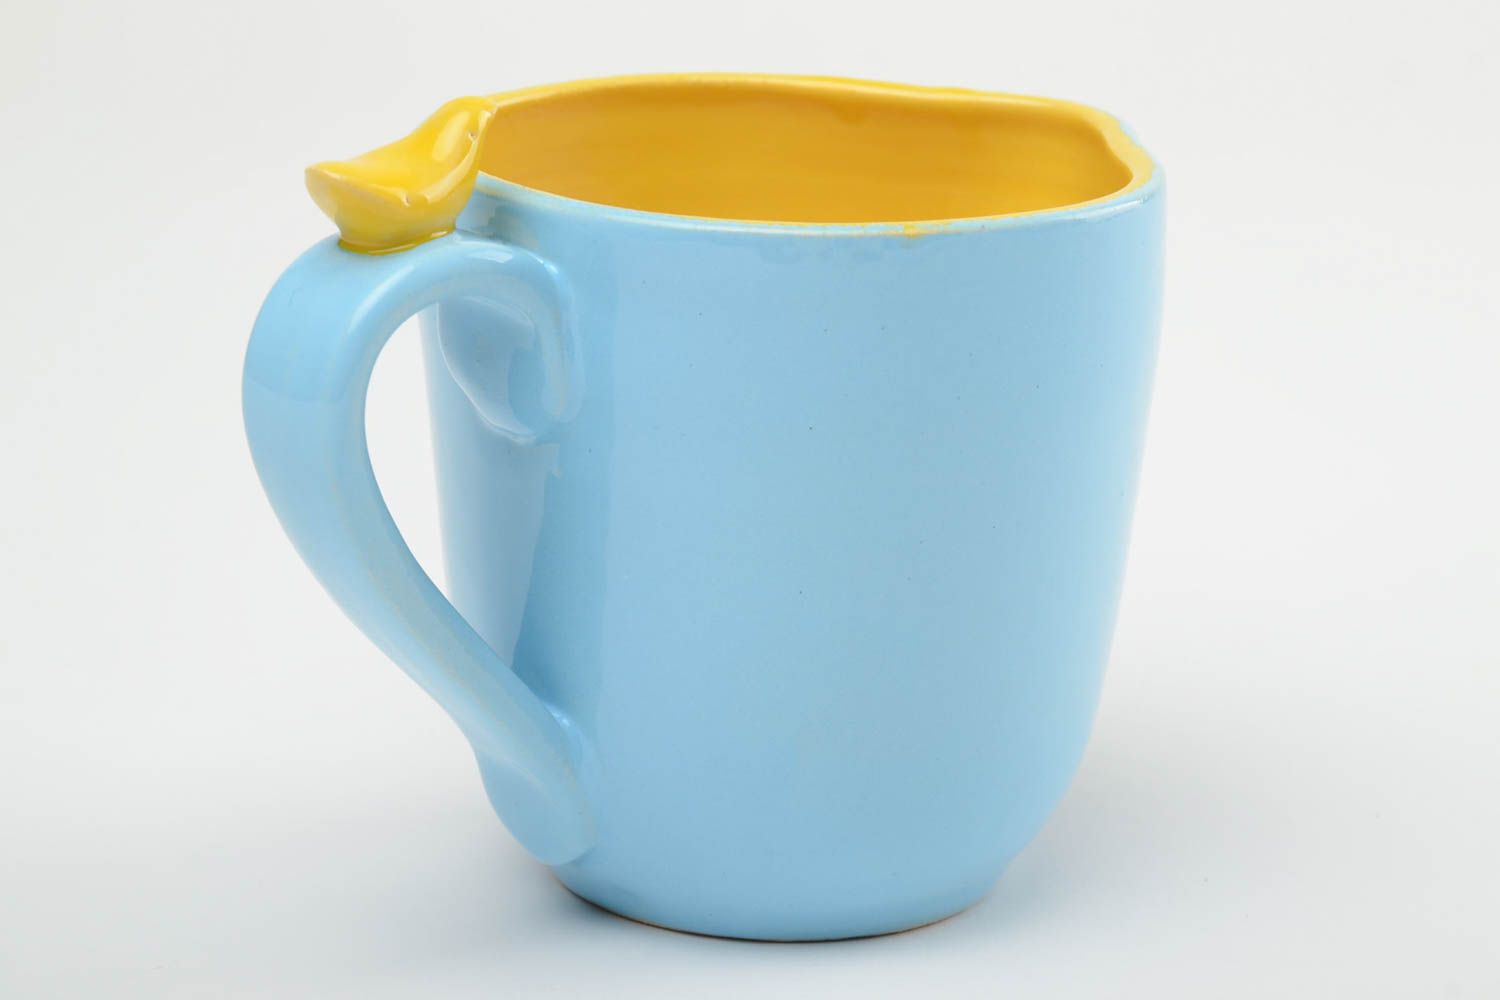 13 oz art ceramic cup in yellow and blue colors with handle photo 4